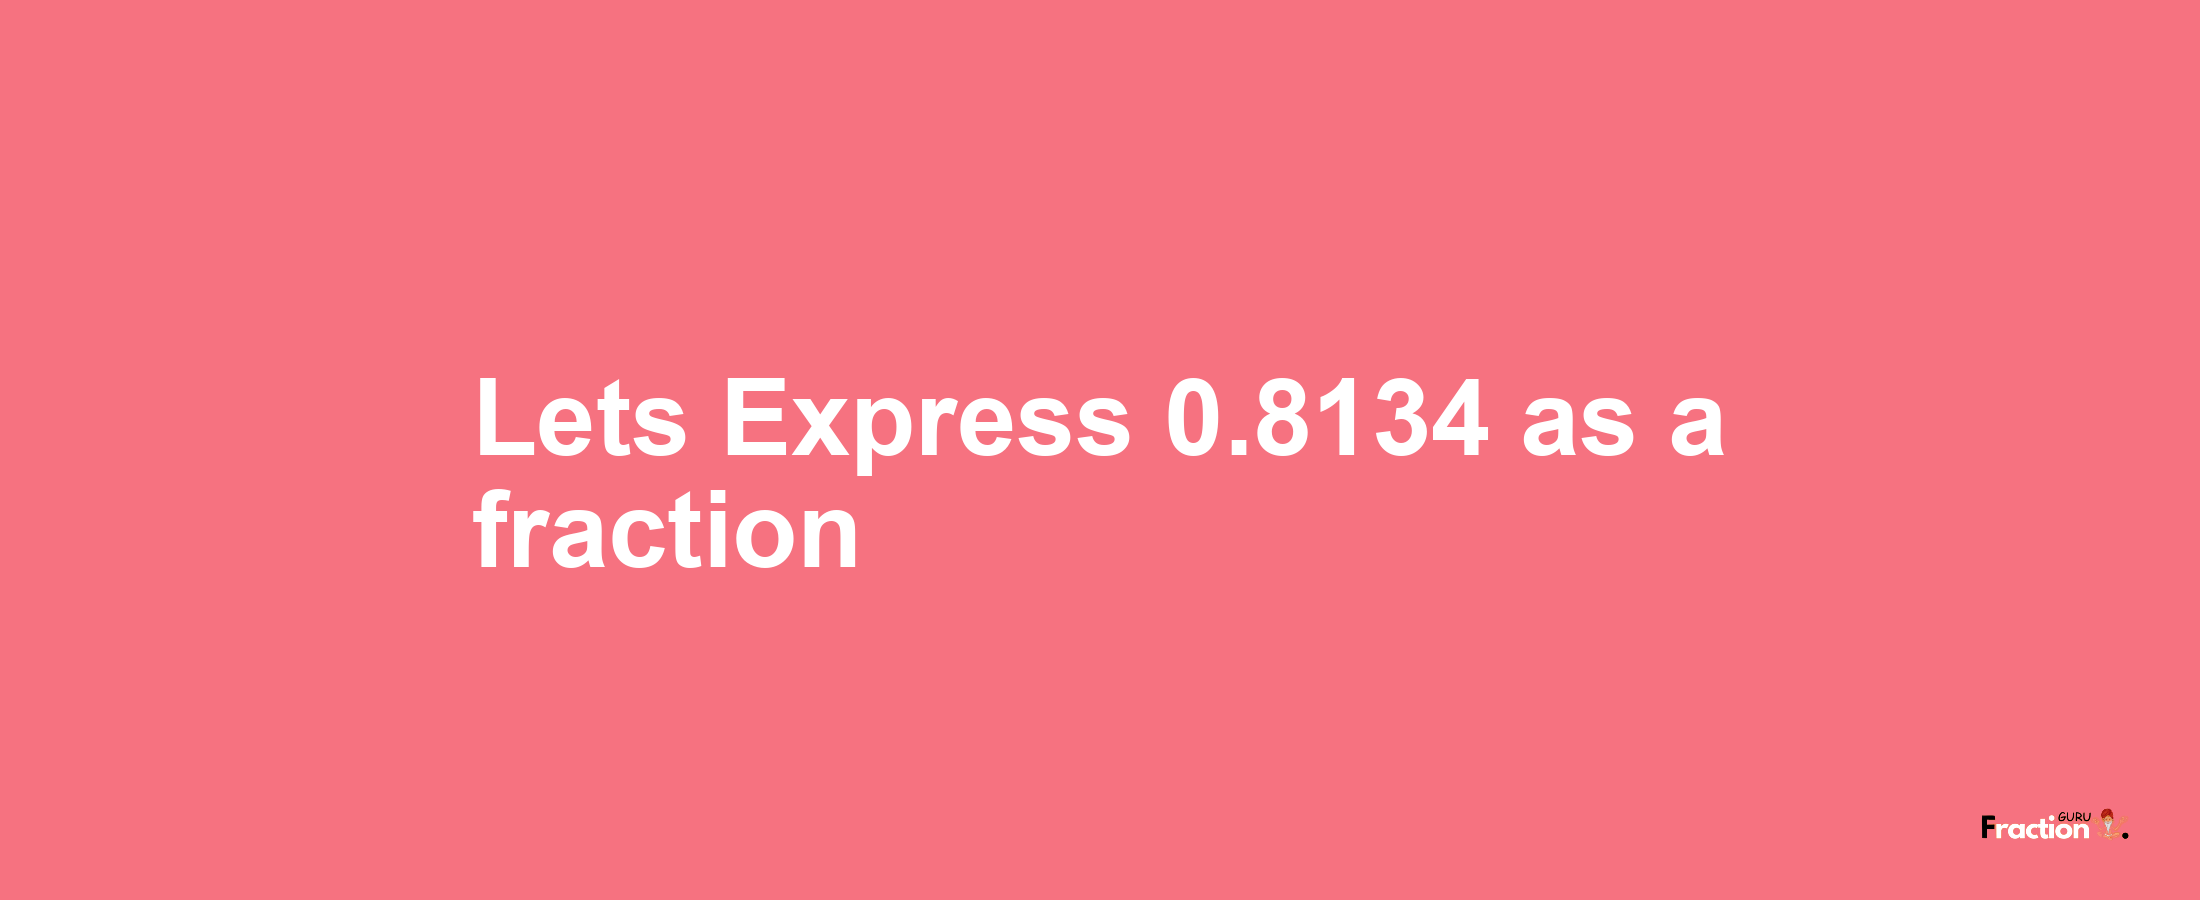 Lets Express 0.8134 as afraction